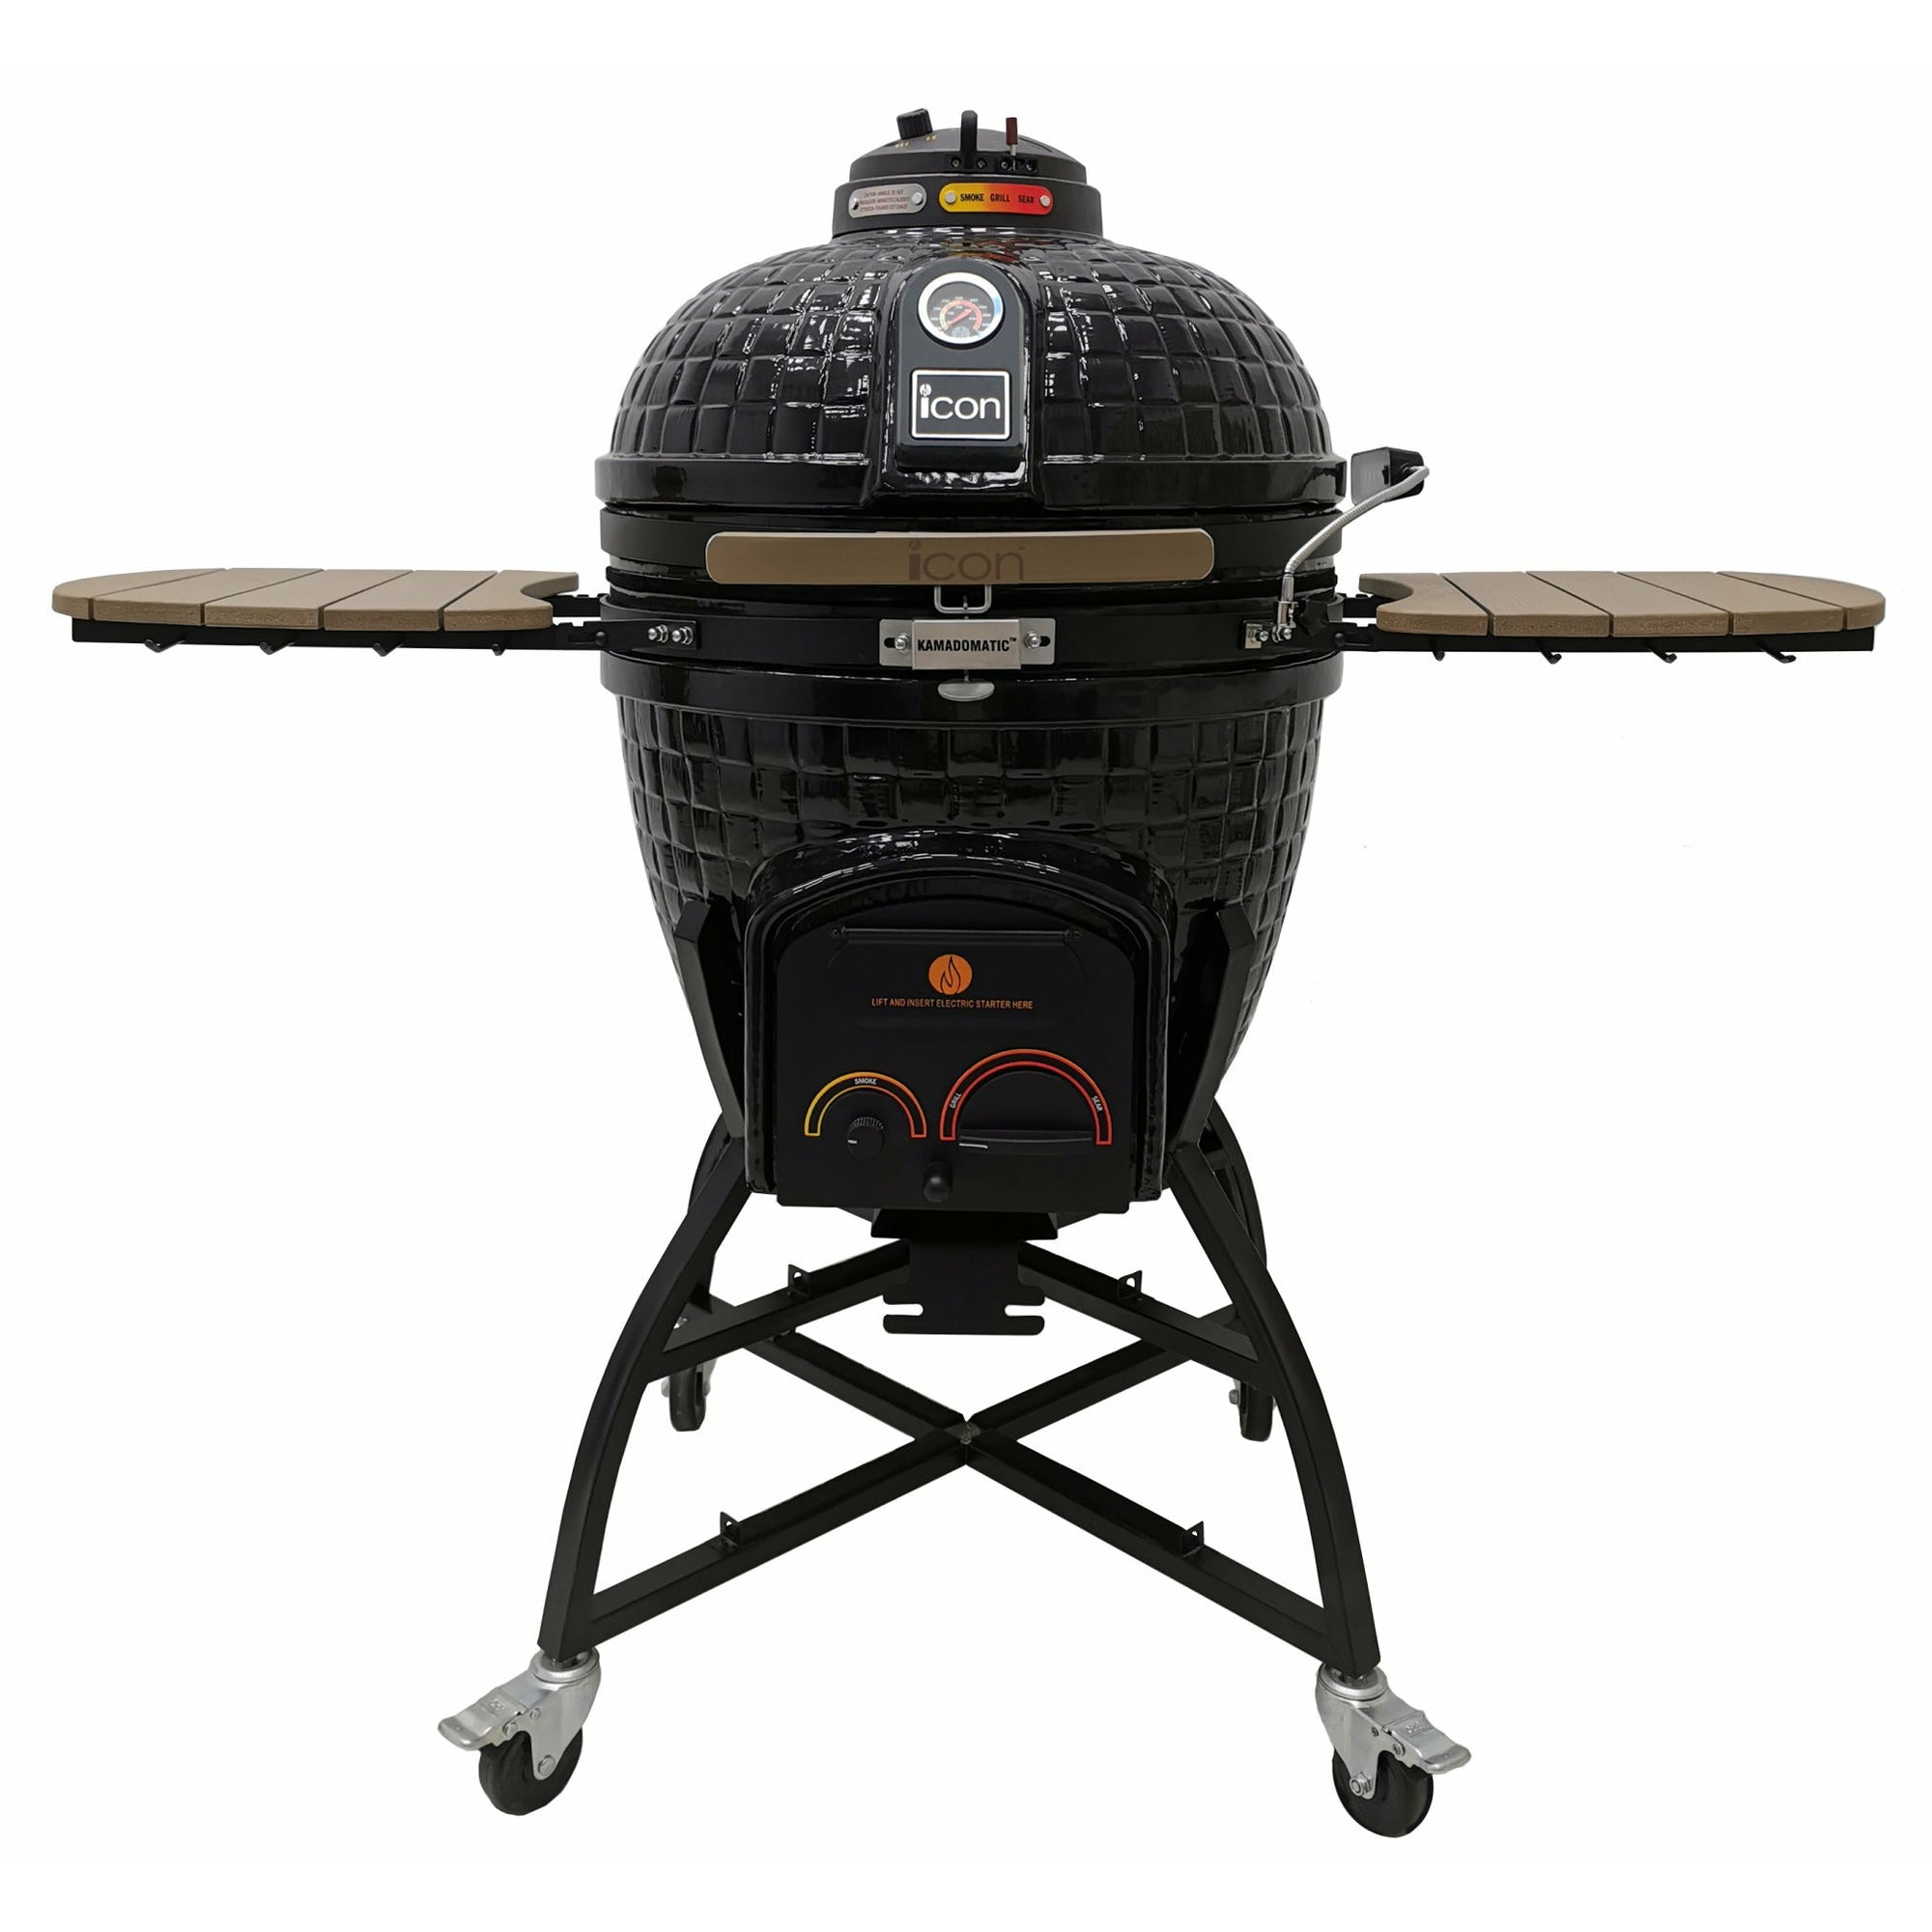 Icon XR402 Deluxe Kamado grill, Black - Color Coded Cast Iron Vent top Vent with smoker knob, cast iron and stainless steel cooking Grids, Easy lift Kamadomatic hinge, upgraded felt & Locking latch Wood sculpted thermoplastic side shelves with accessory hooks, electric starter port , electric starter holster, removable ash tray, extra wide storage cart with 3" caster wheels in a white background